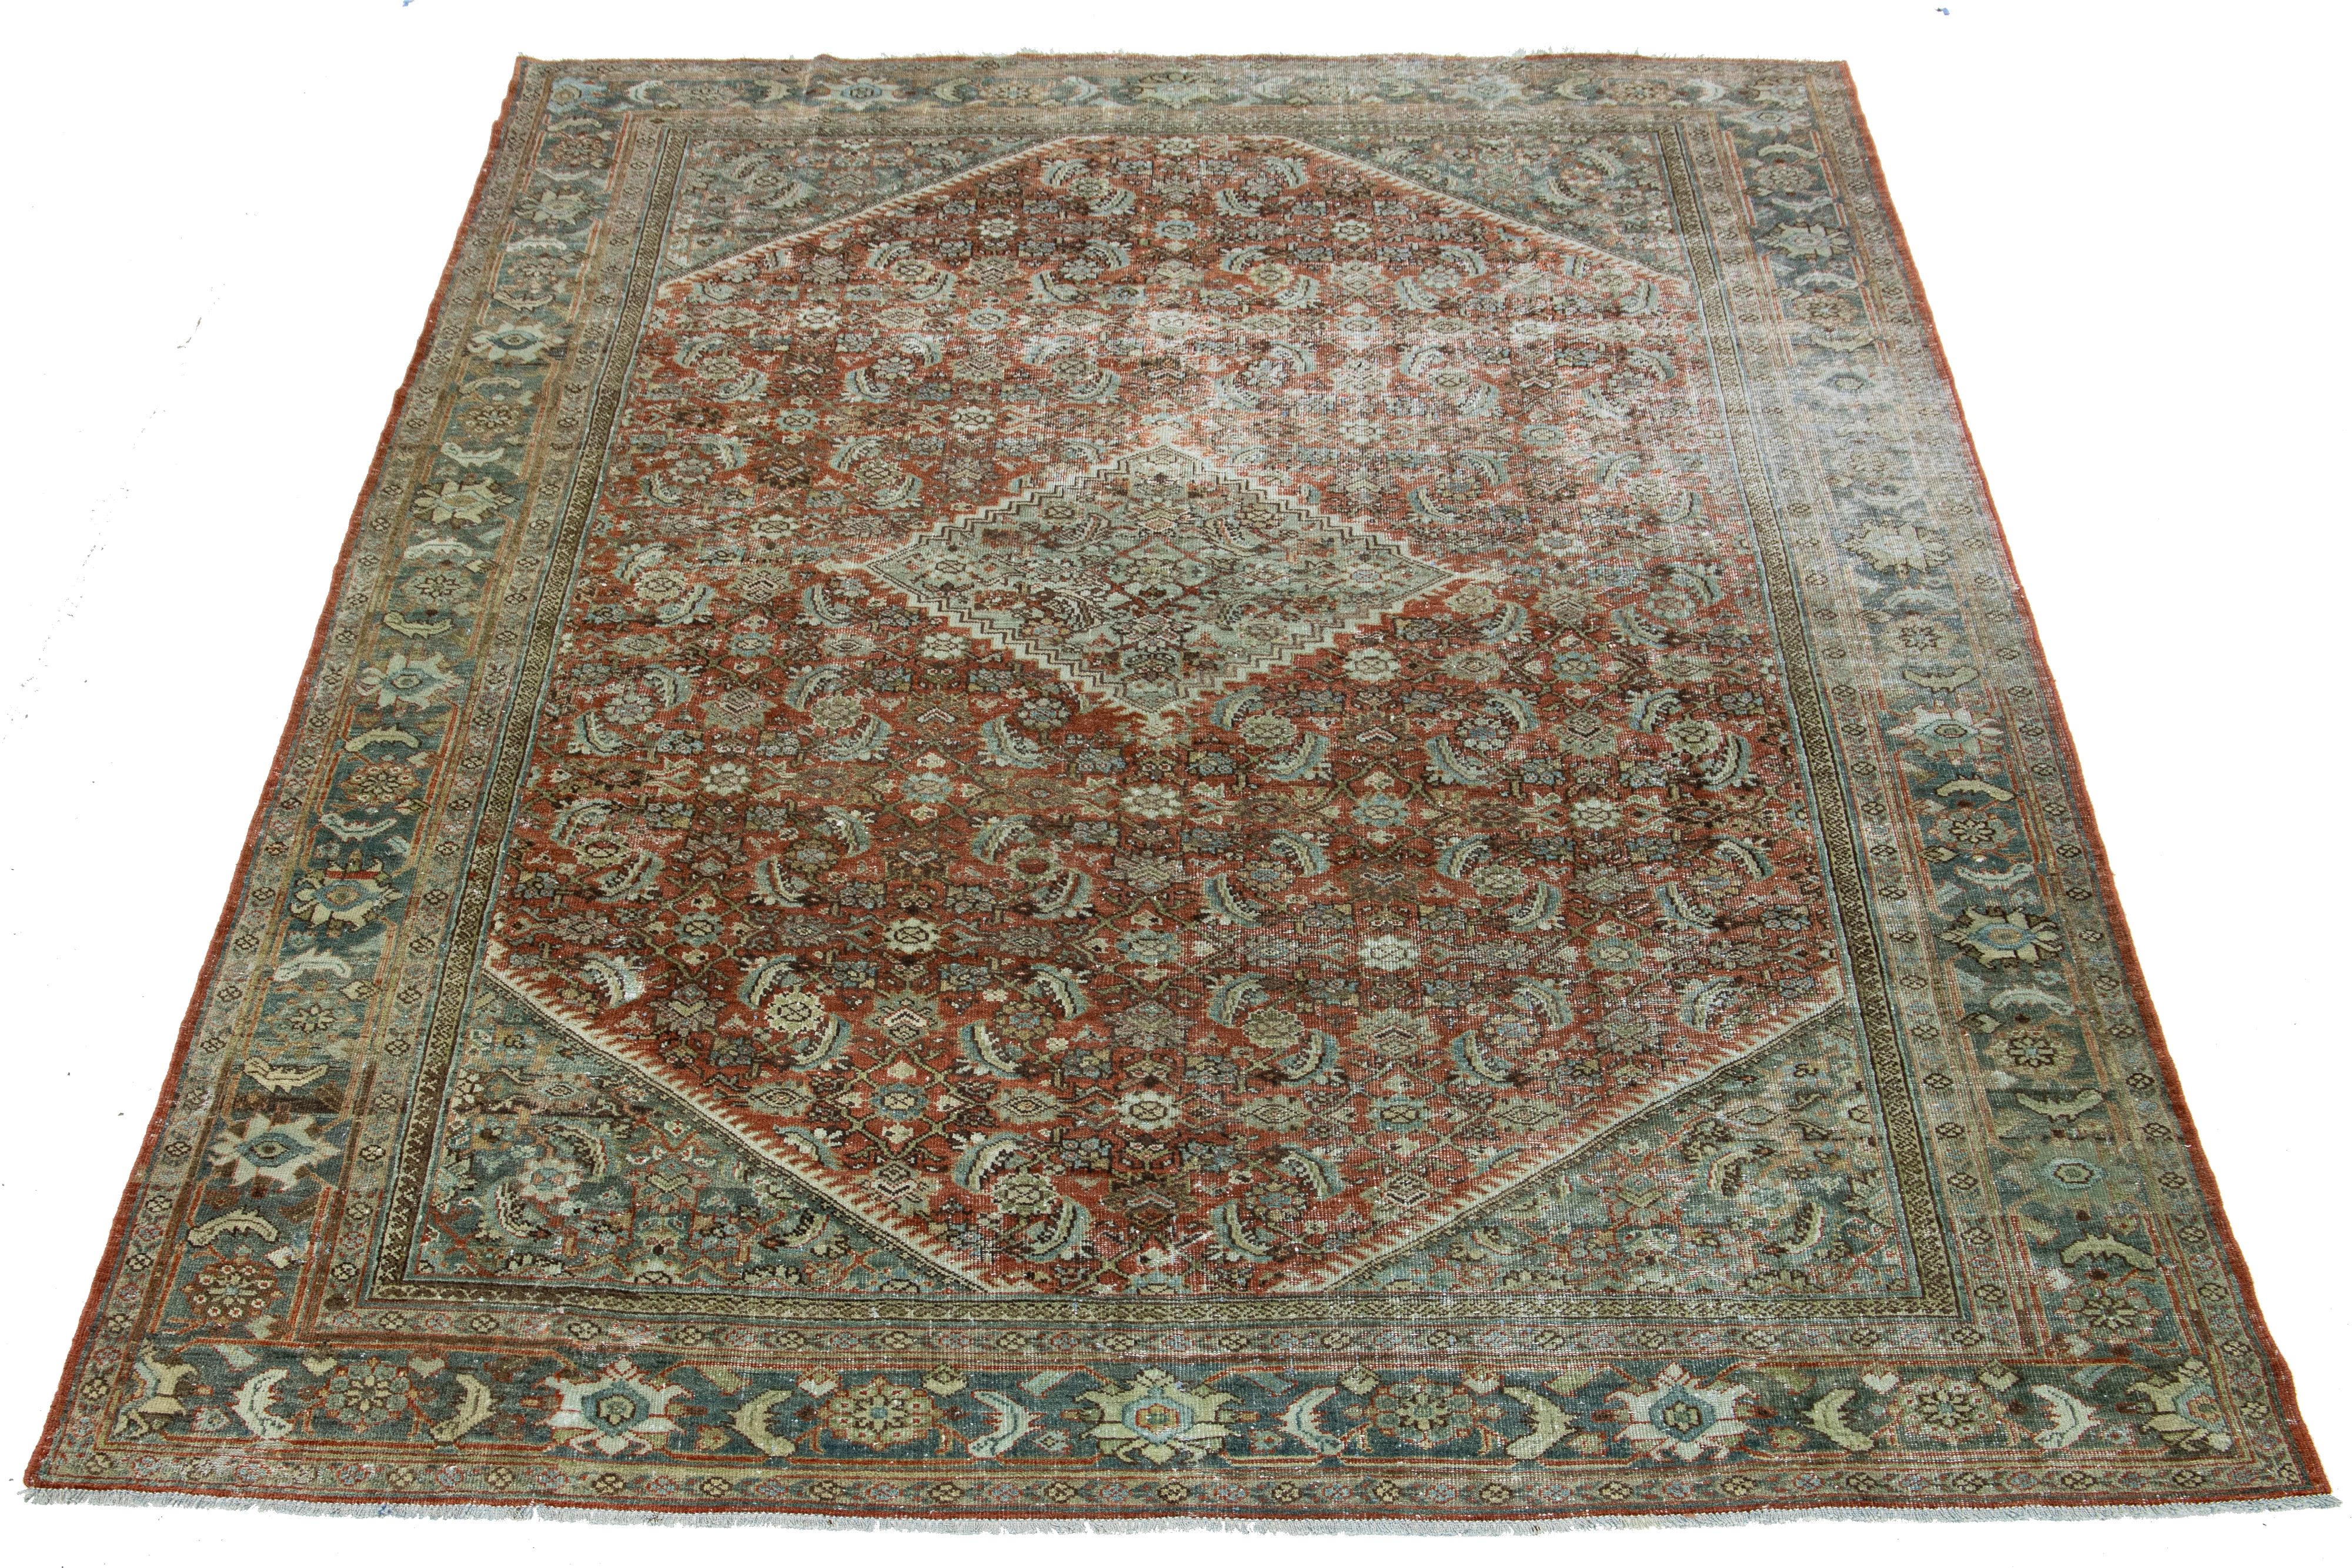 A hand-knotted wool antique Mahal rug features an all-over design with blue, brown, and beige accents on a red rust color field.

This rug measures 8'6